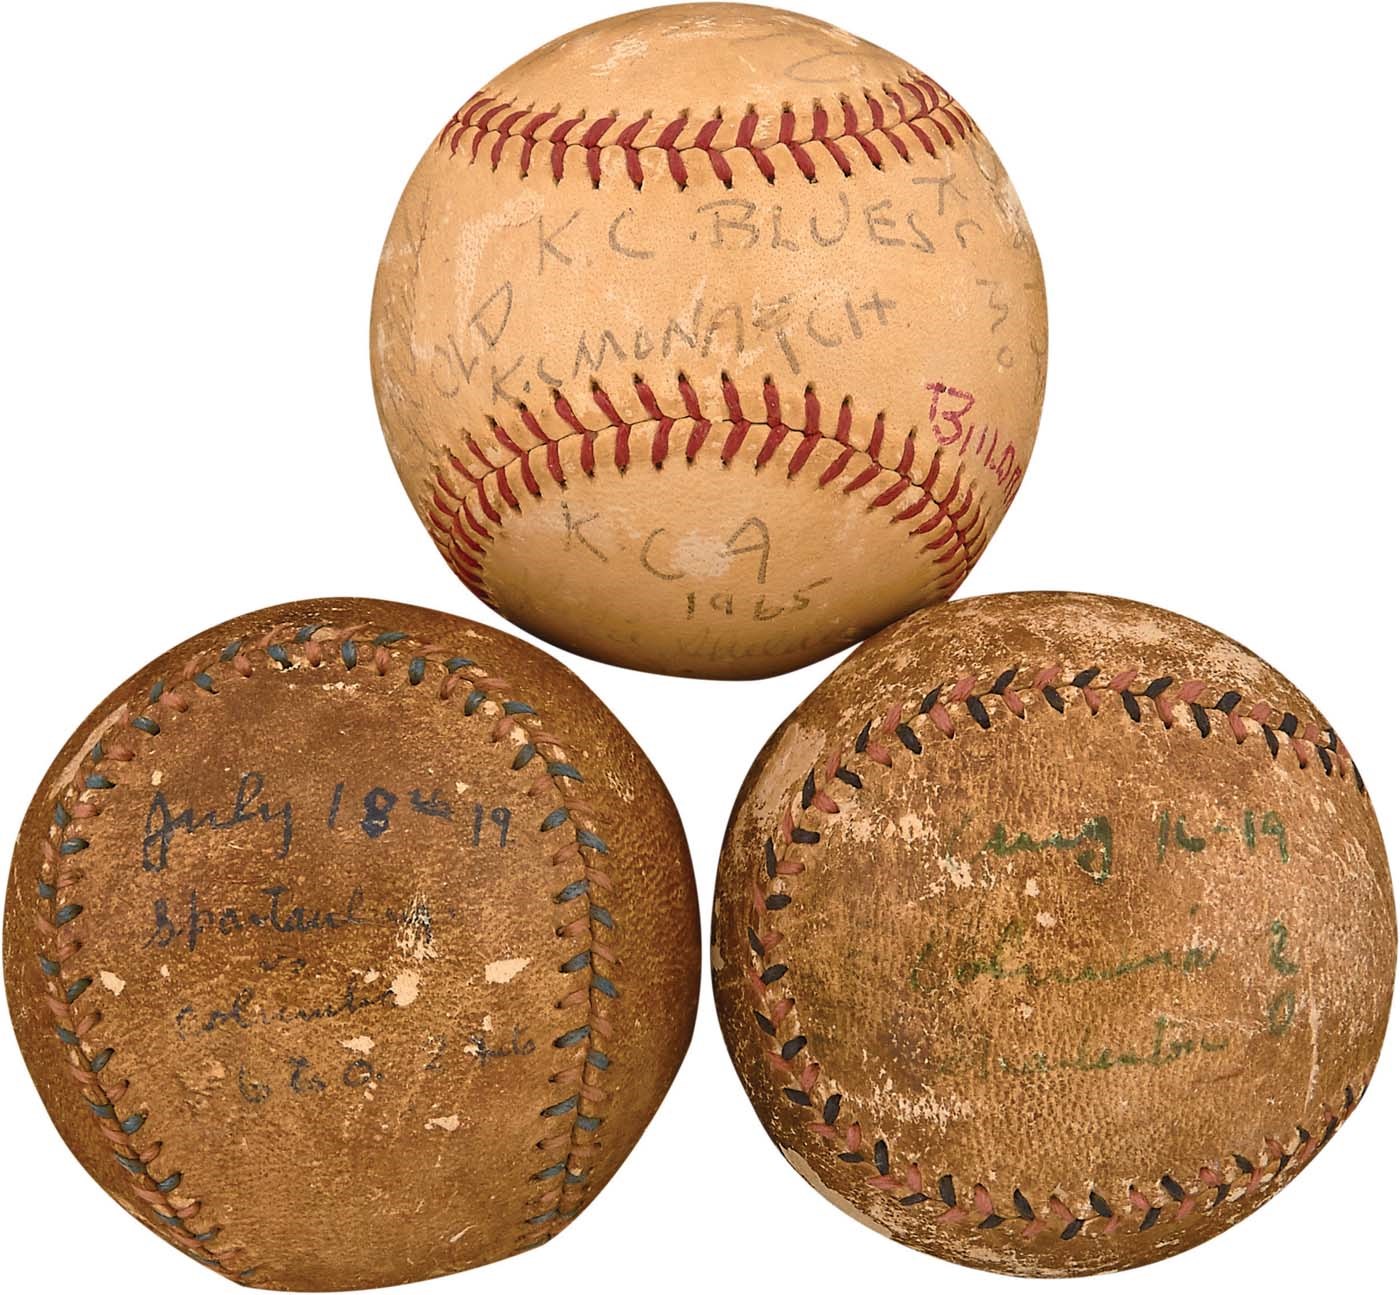 - Historic 1965 Game Used Baseball from Satchel Paige's Last Game